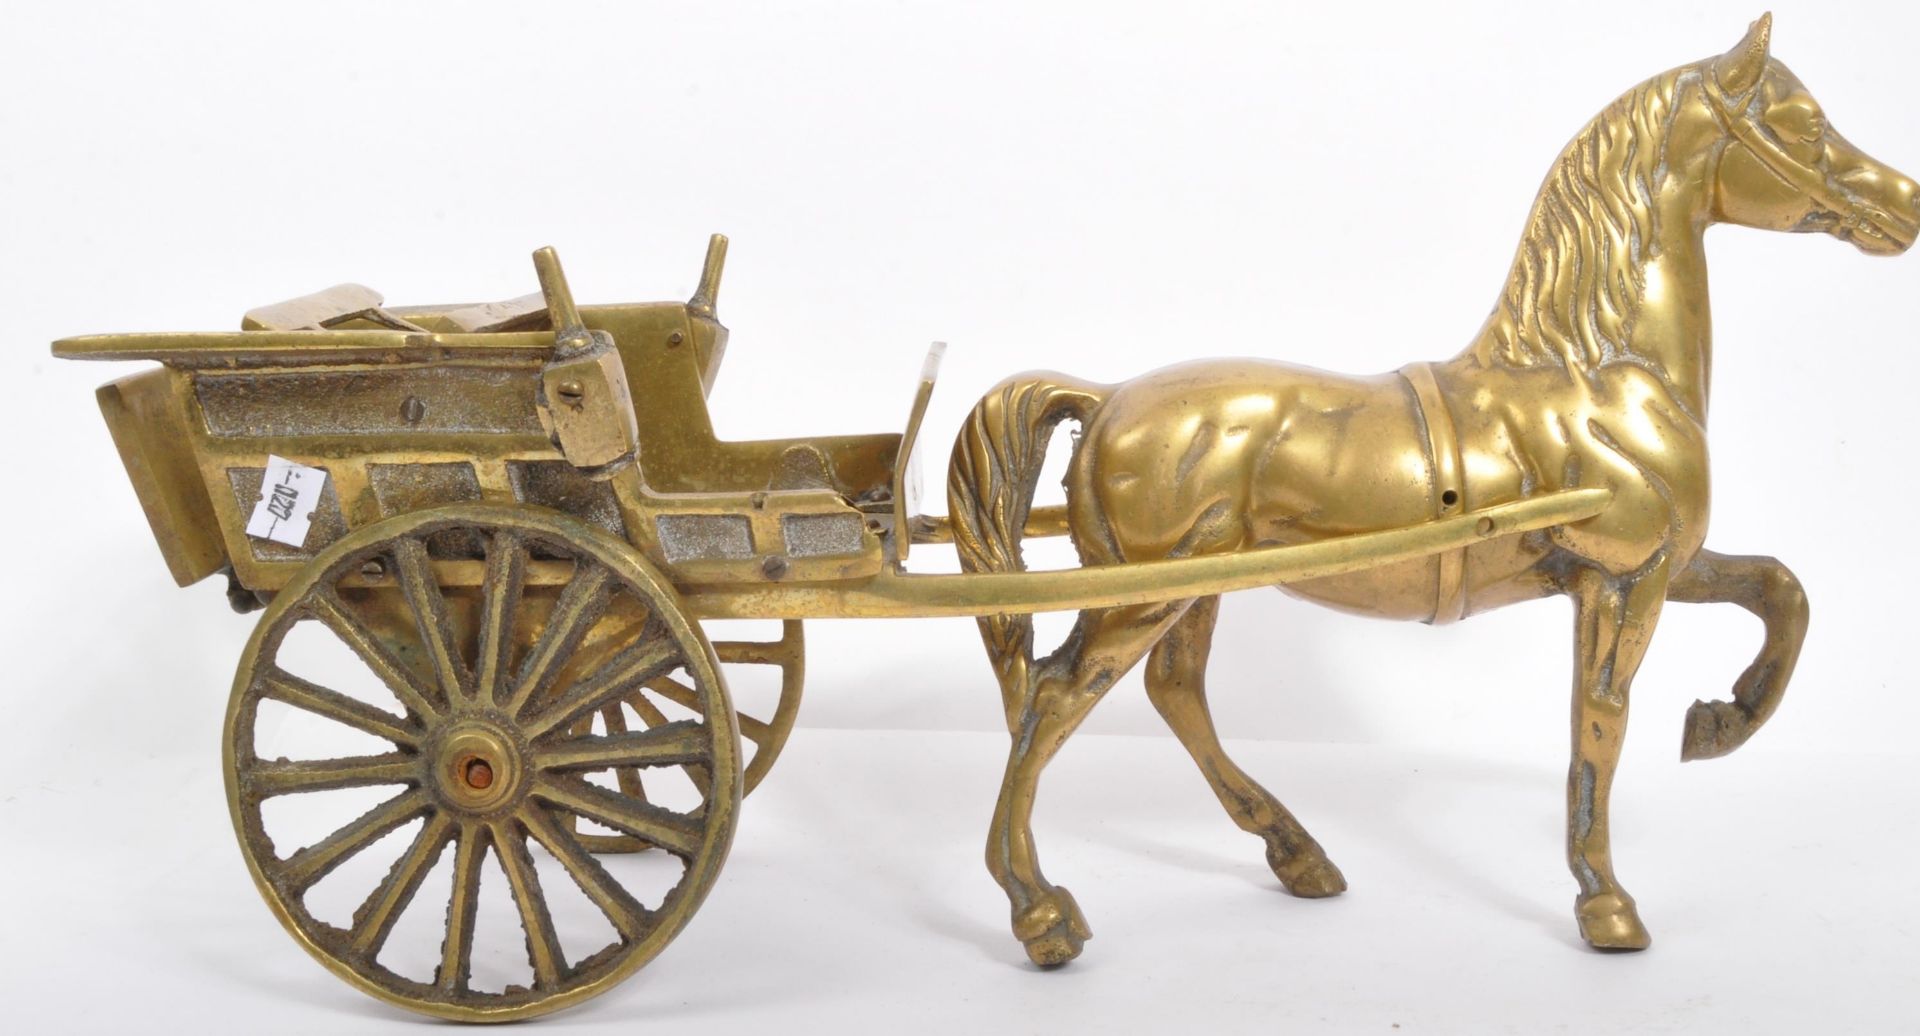 TWO VINTAGE 20TH CENTURY BRASS HORSE & CART FIGURES - Image 2 of 6